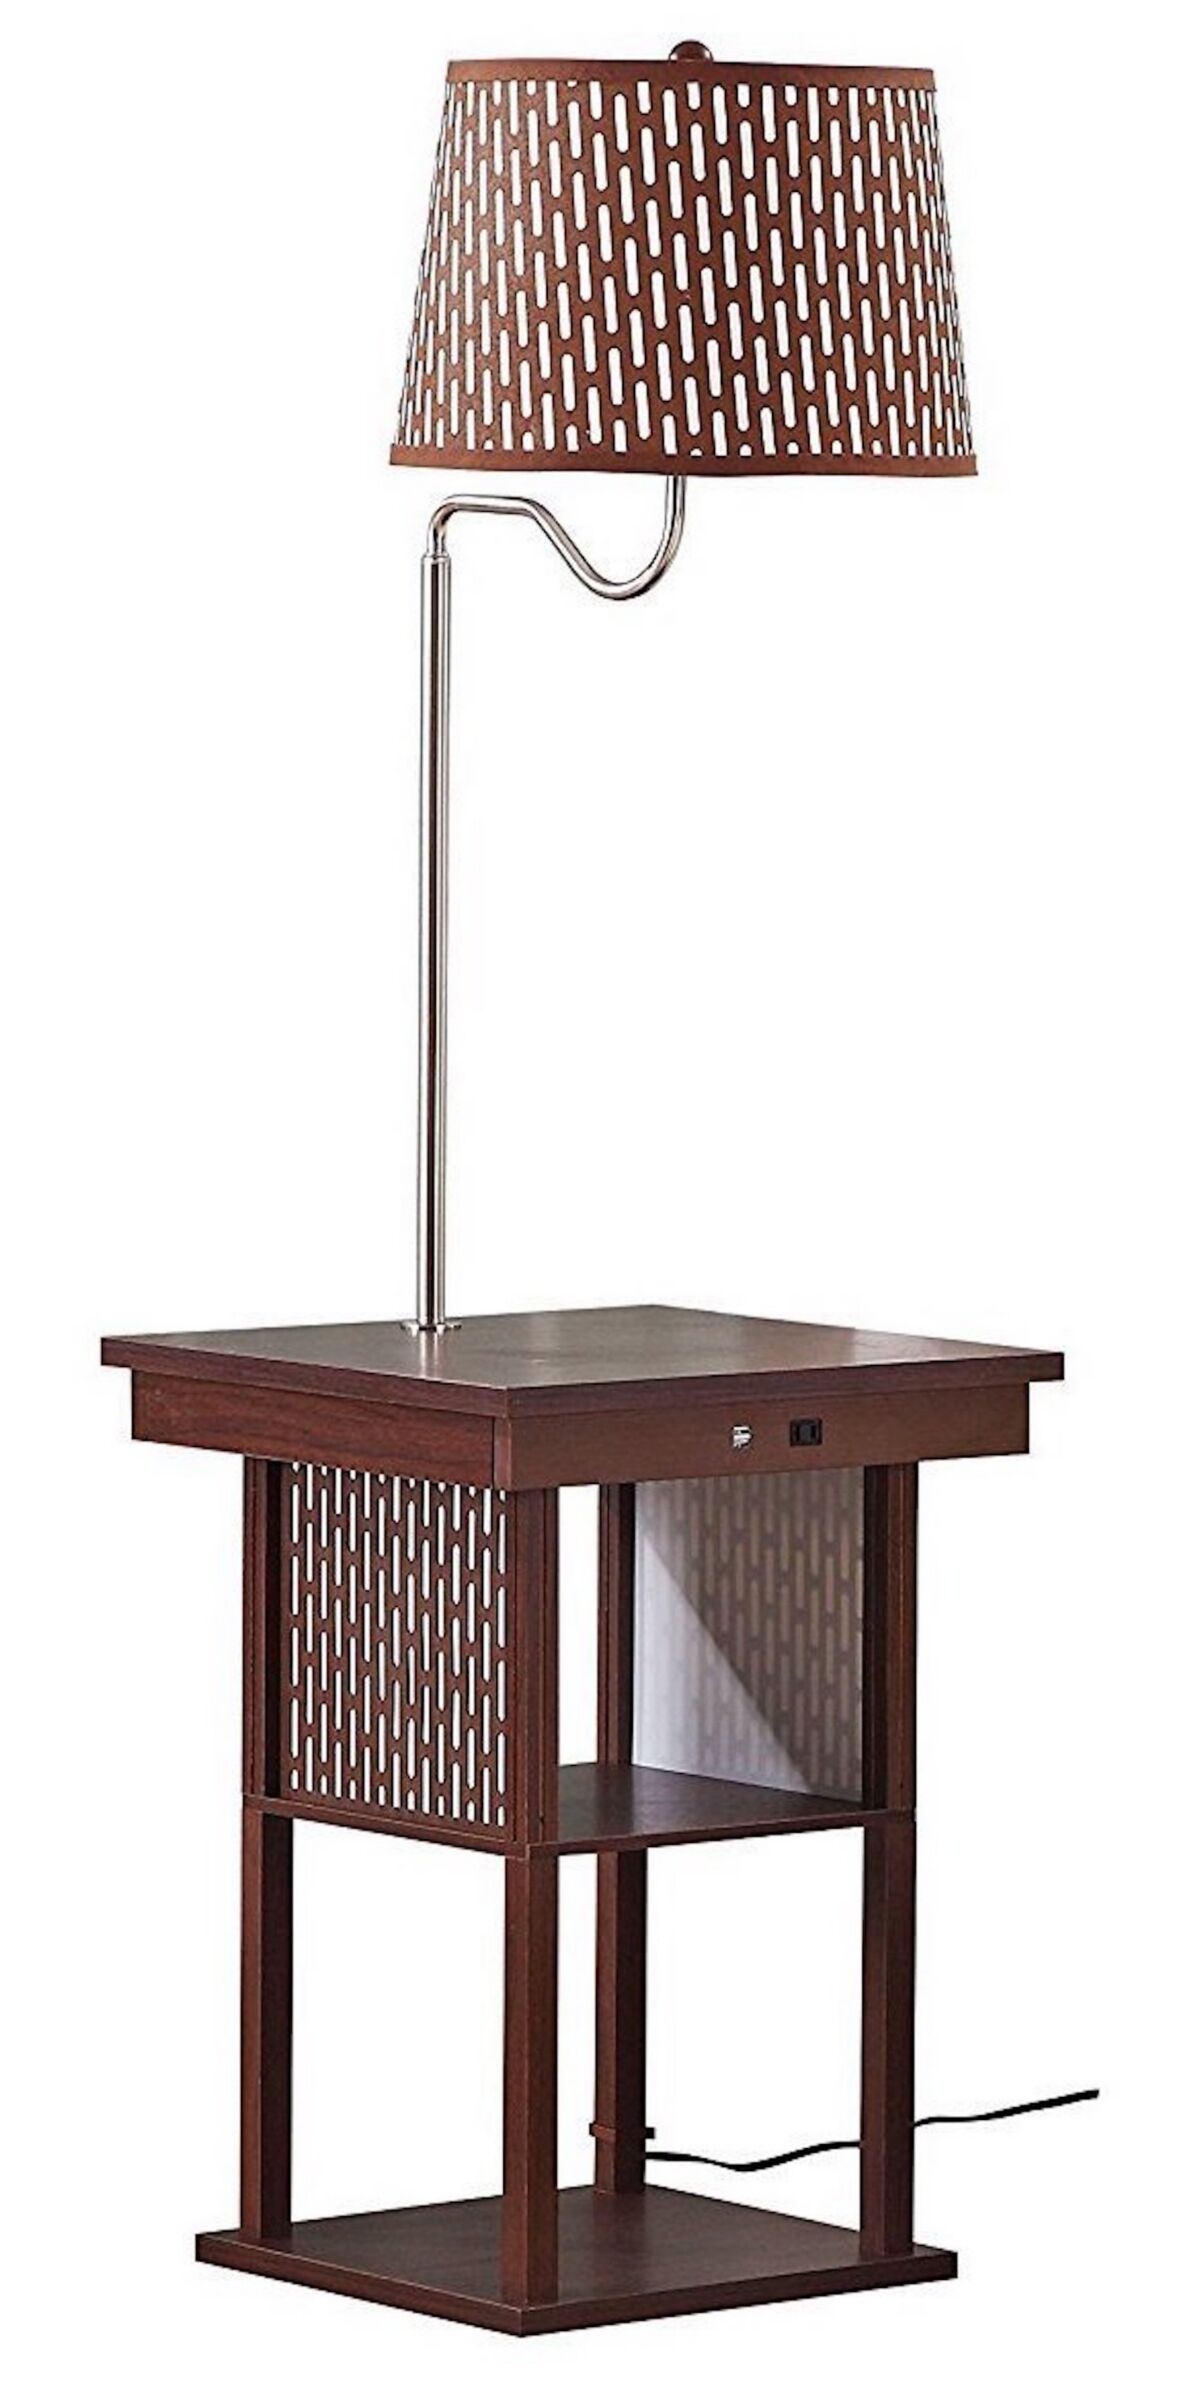 Brightech Madison Table & Led Lamp Combo with Usb Port and Outlet - Havana Brown/pattern